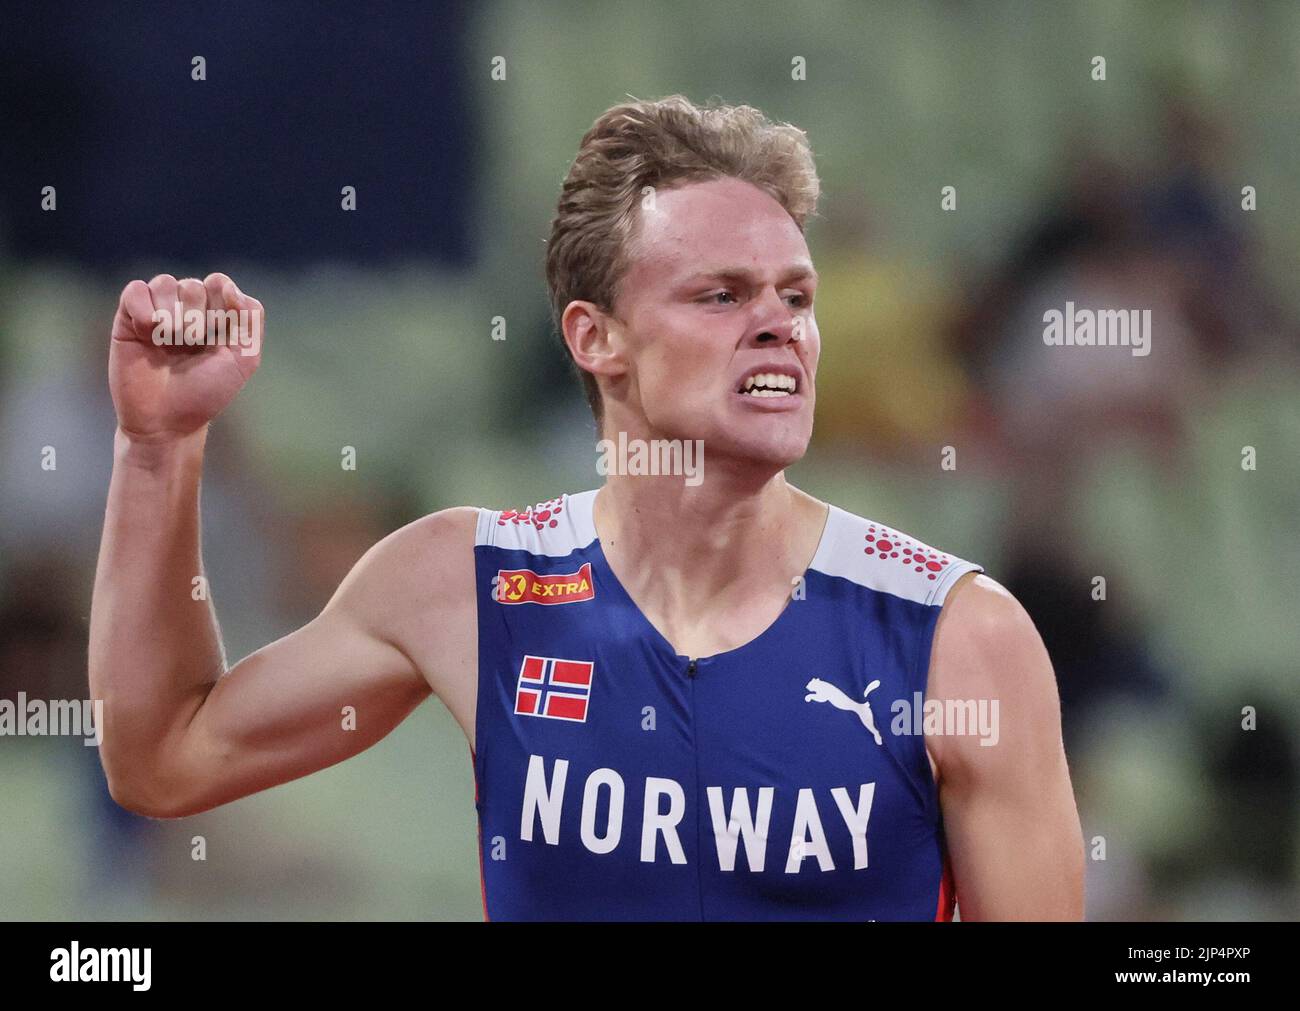 Athletics - 2022 European Championships - Olympiastadion, Munich, Germany - August 15, 2022 Norway's Sander Skotheim reacts after winning his men's decathlon 400m heat REUTERS/Wolfgang Rattay Stock Photo